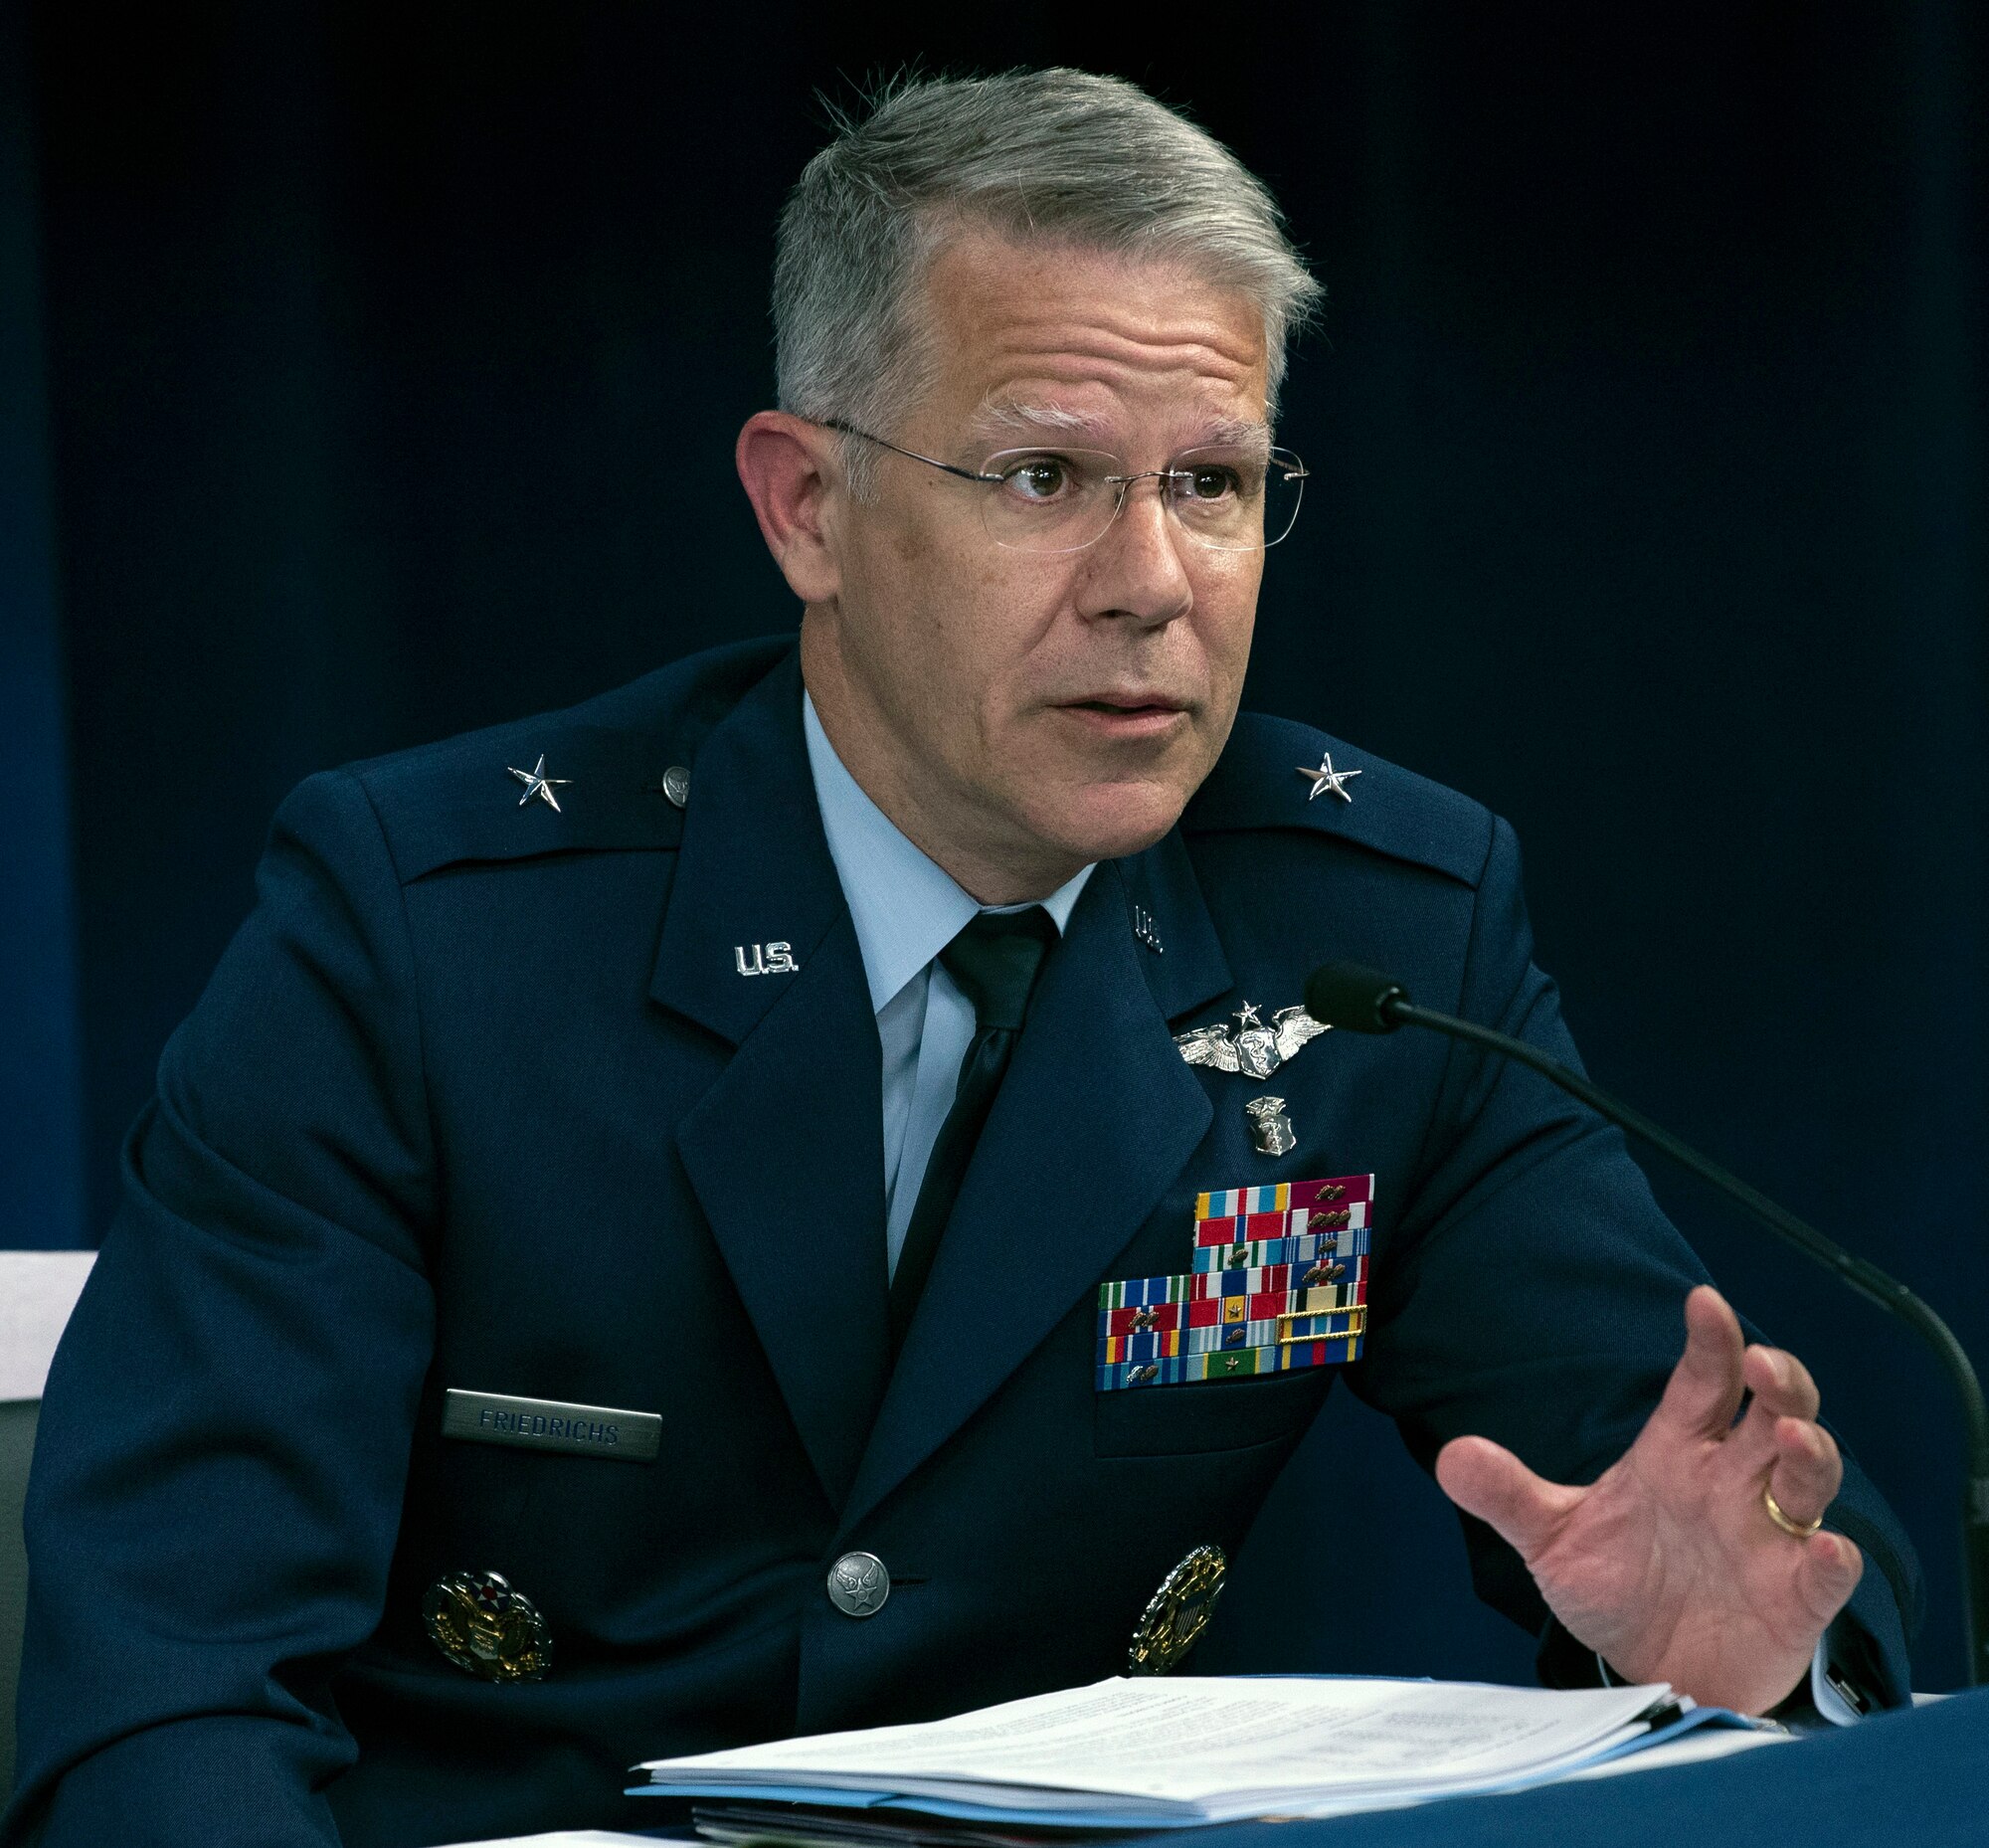 Air Force Brig. Gen. (Dr.) Paul Friedrichs, Joint Staff surgeon and medical advisor to the Defense Department’s coronavirus task force, speaks during a Pentagon news conference on DOD COVID-19 testing, July 30, 2020.